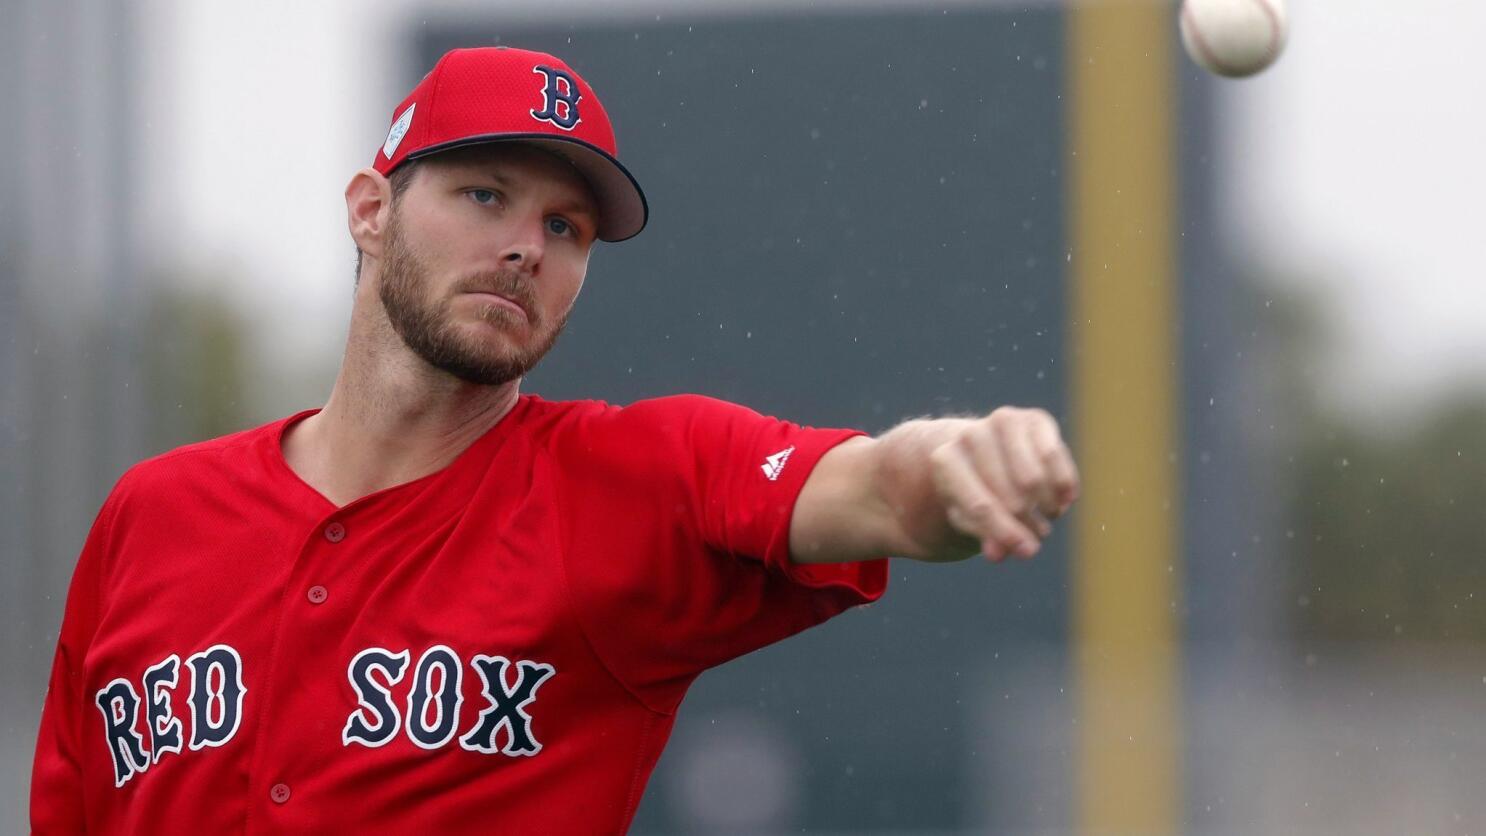 As pitchers and catchers report, who's invited to Red Sox spring training?